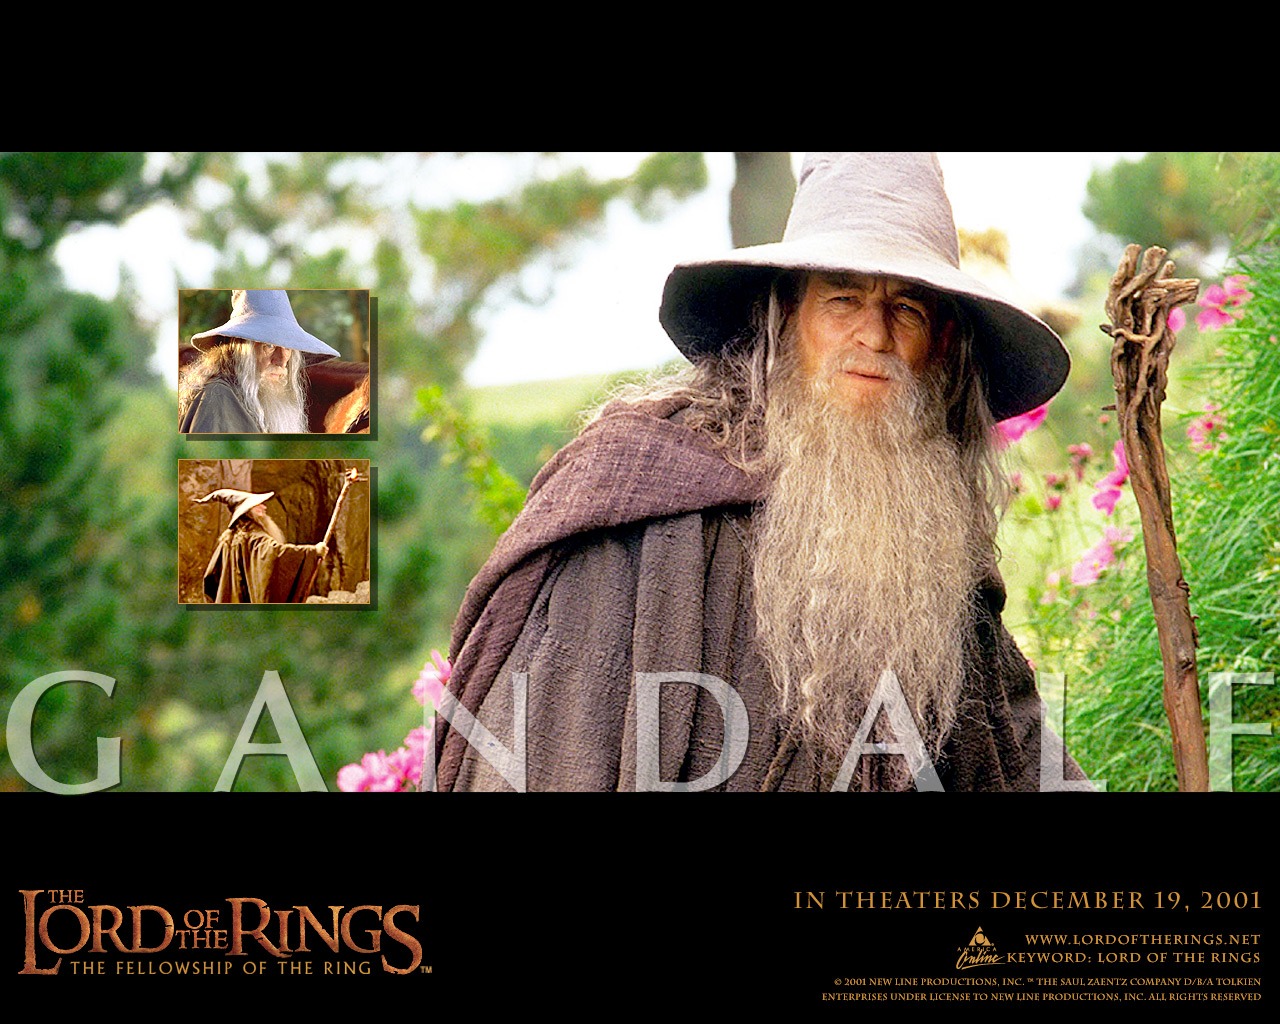 The Lord of the Rings wallpaper #5 - 1280x1024